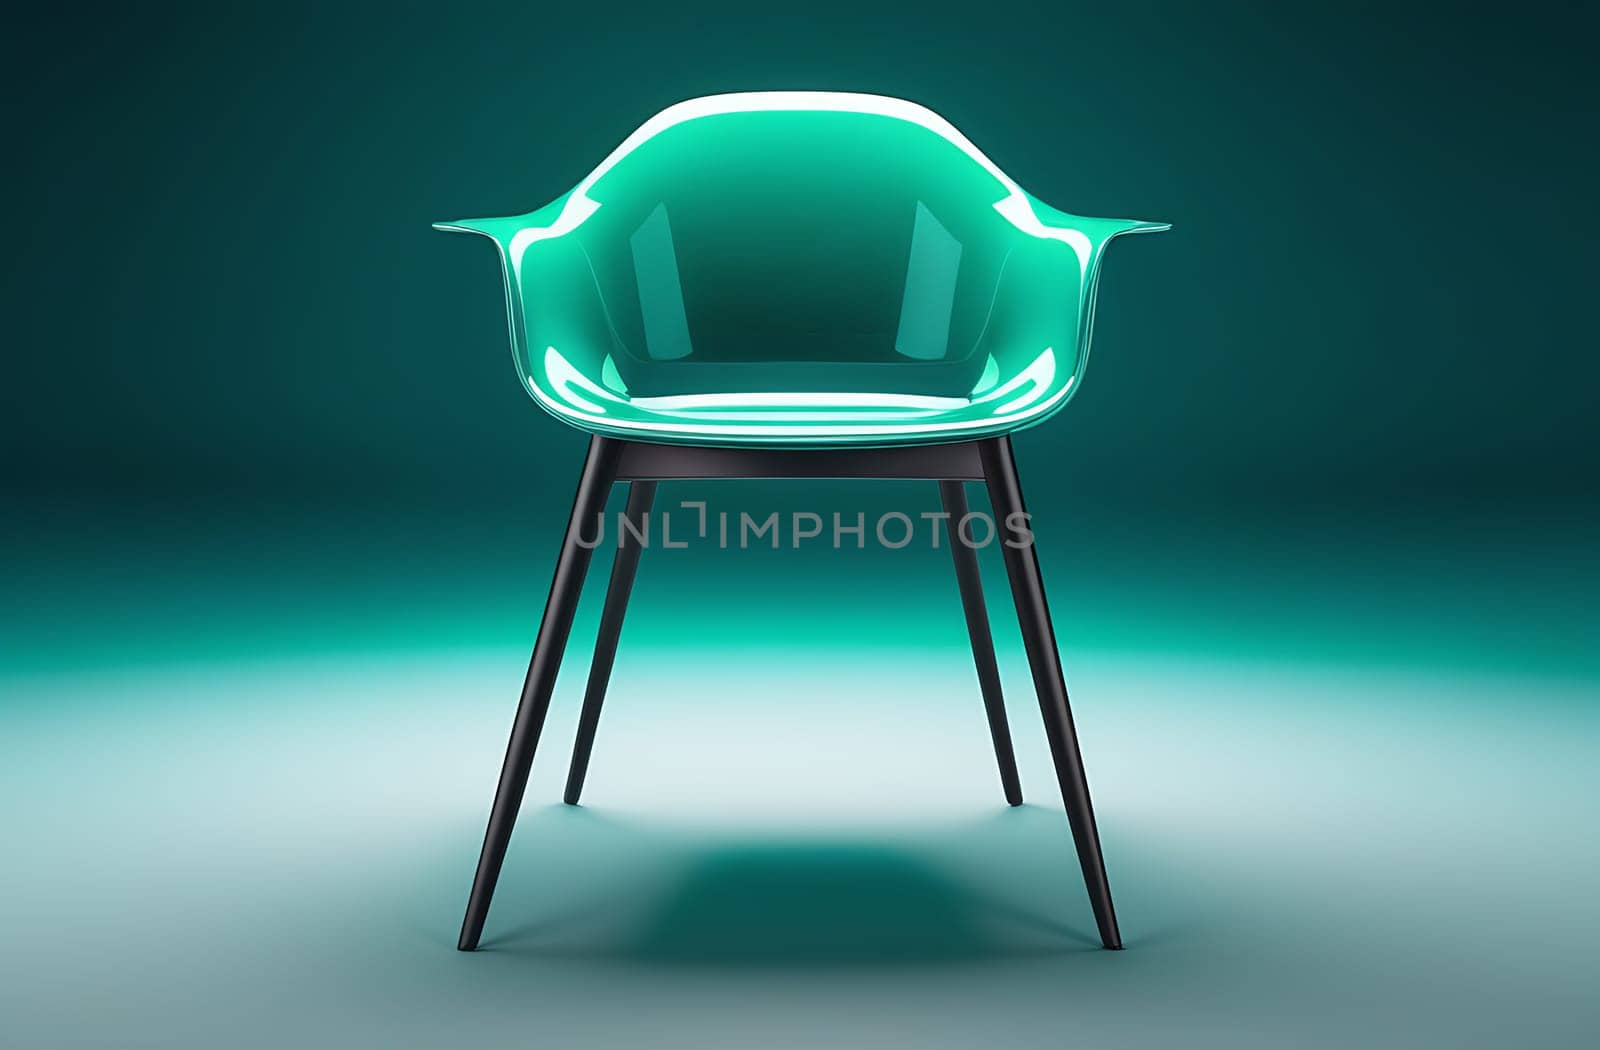 One transparent acrylic chair in green color, on a dark background, modern design.